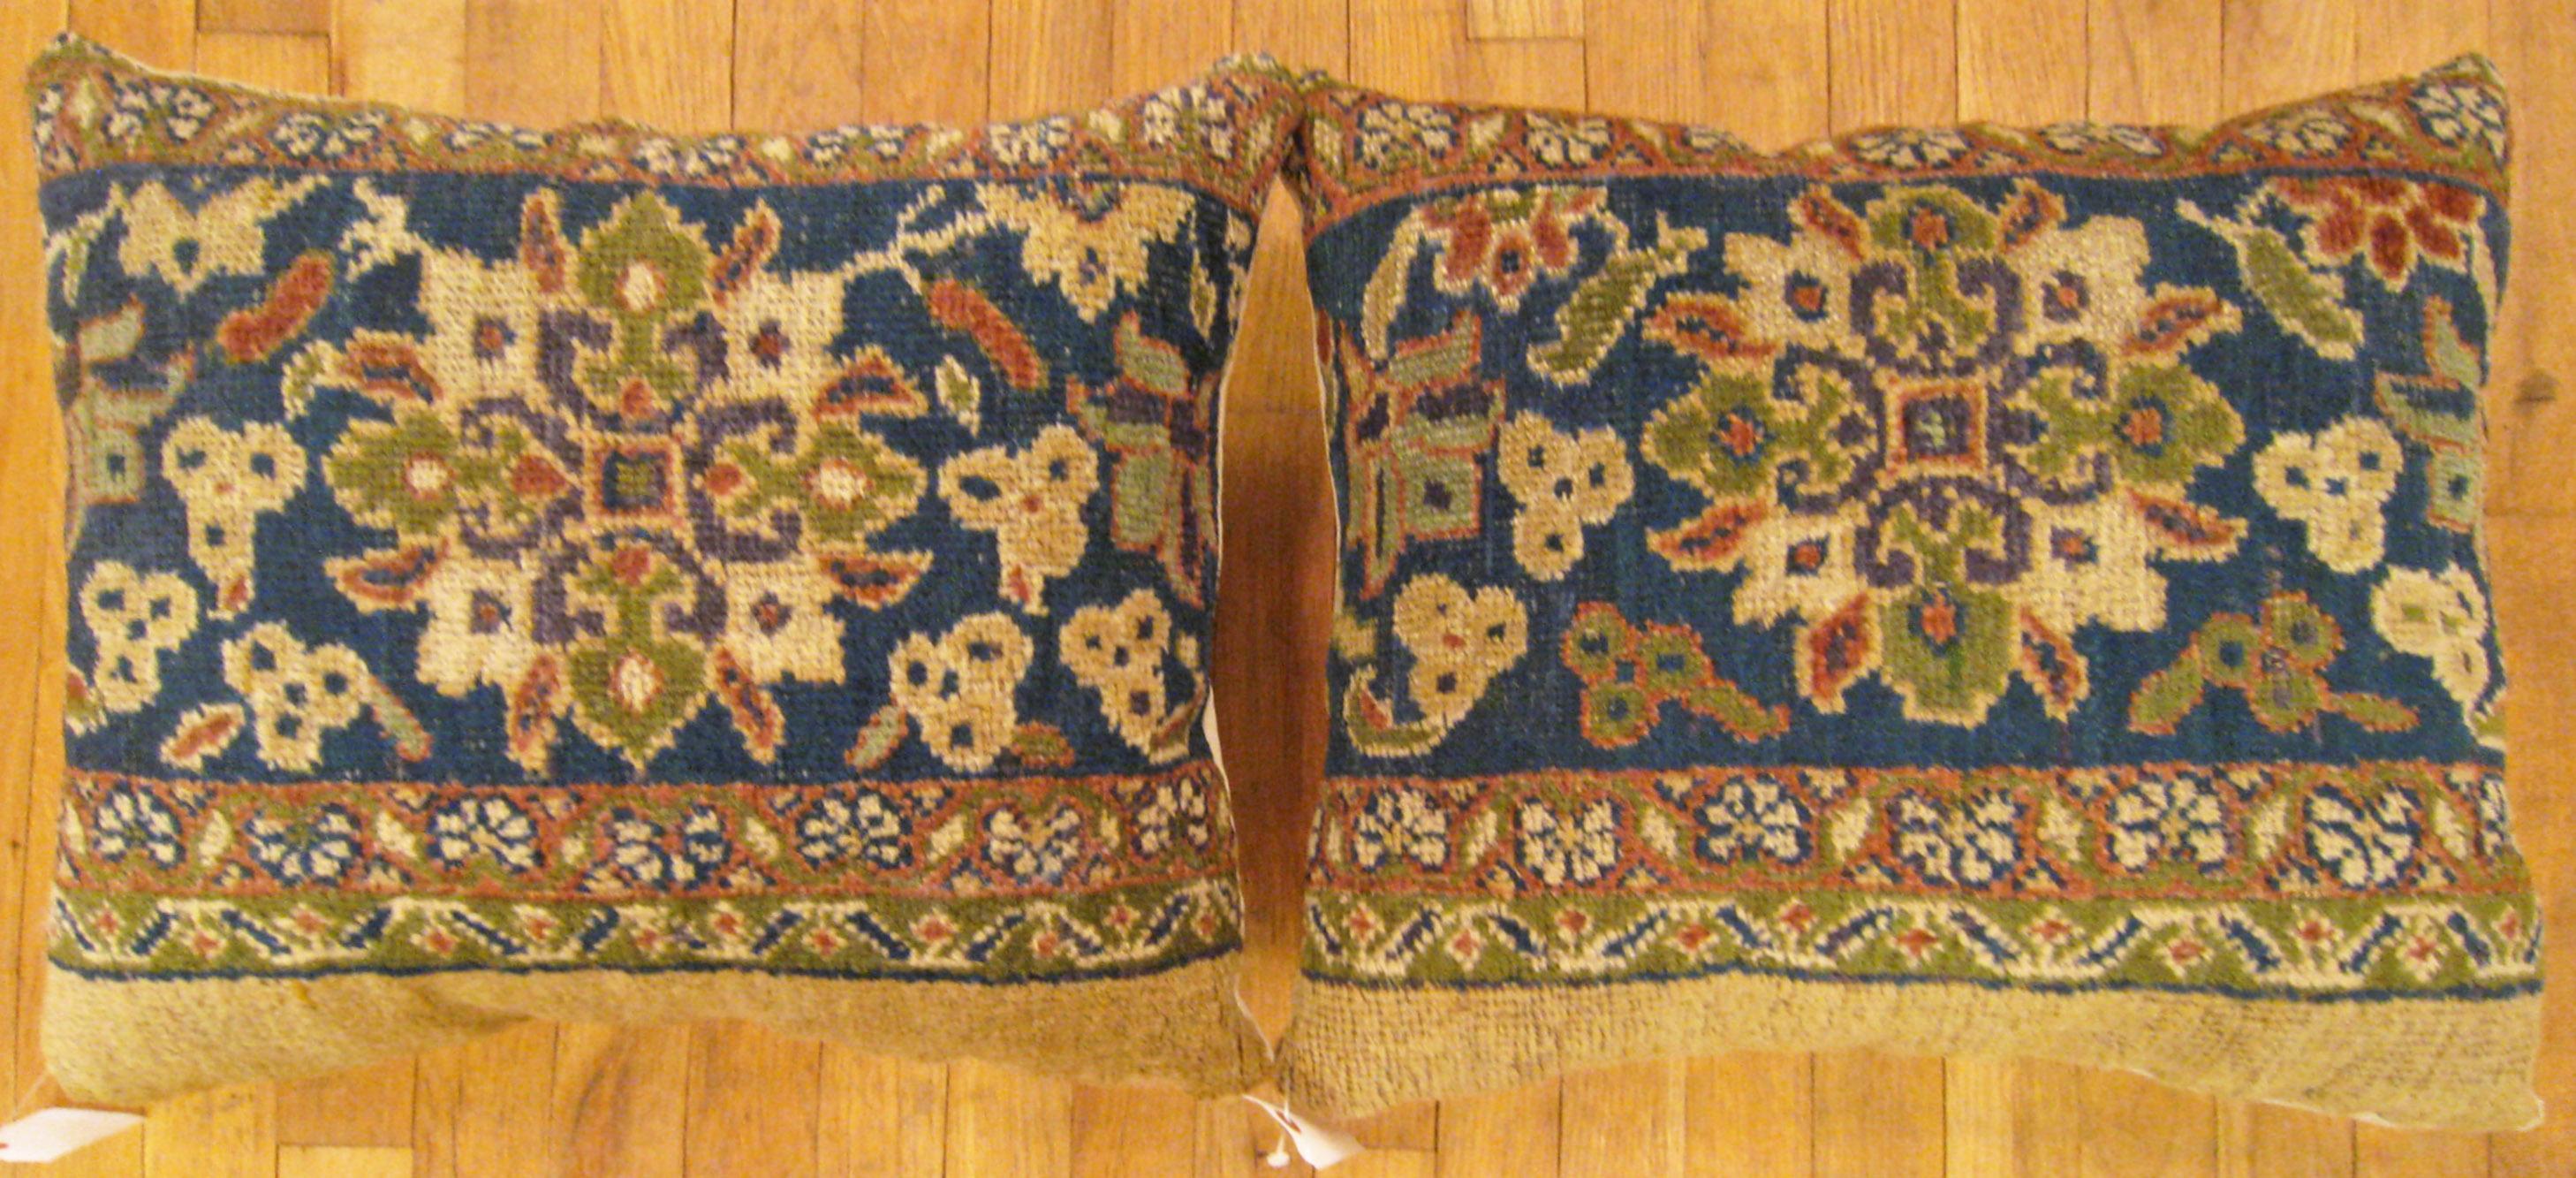 A pair of antique Persian sultanabad carpet pillows ; size 1'10” x 1'6” Each.

An antique decorative pillows with floral elements allover a camel central field, size 1'10” x 1'6” each. This lovely decorative pillow features an antique fabric of a